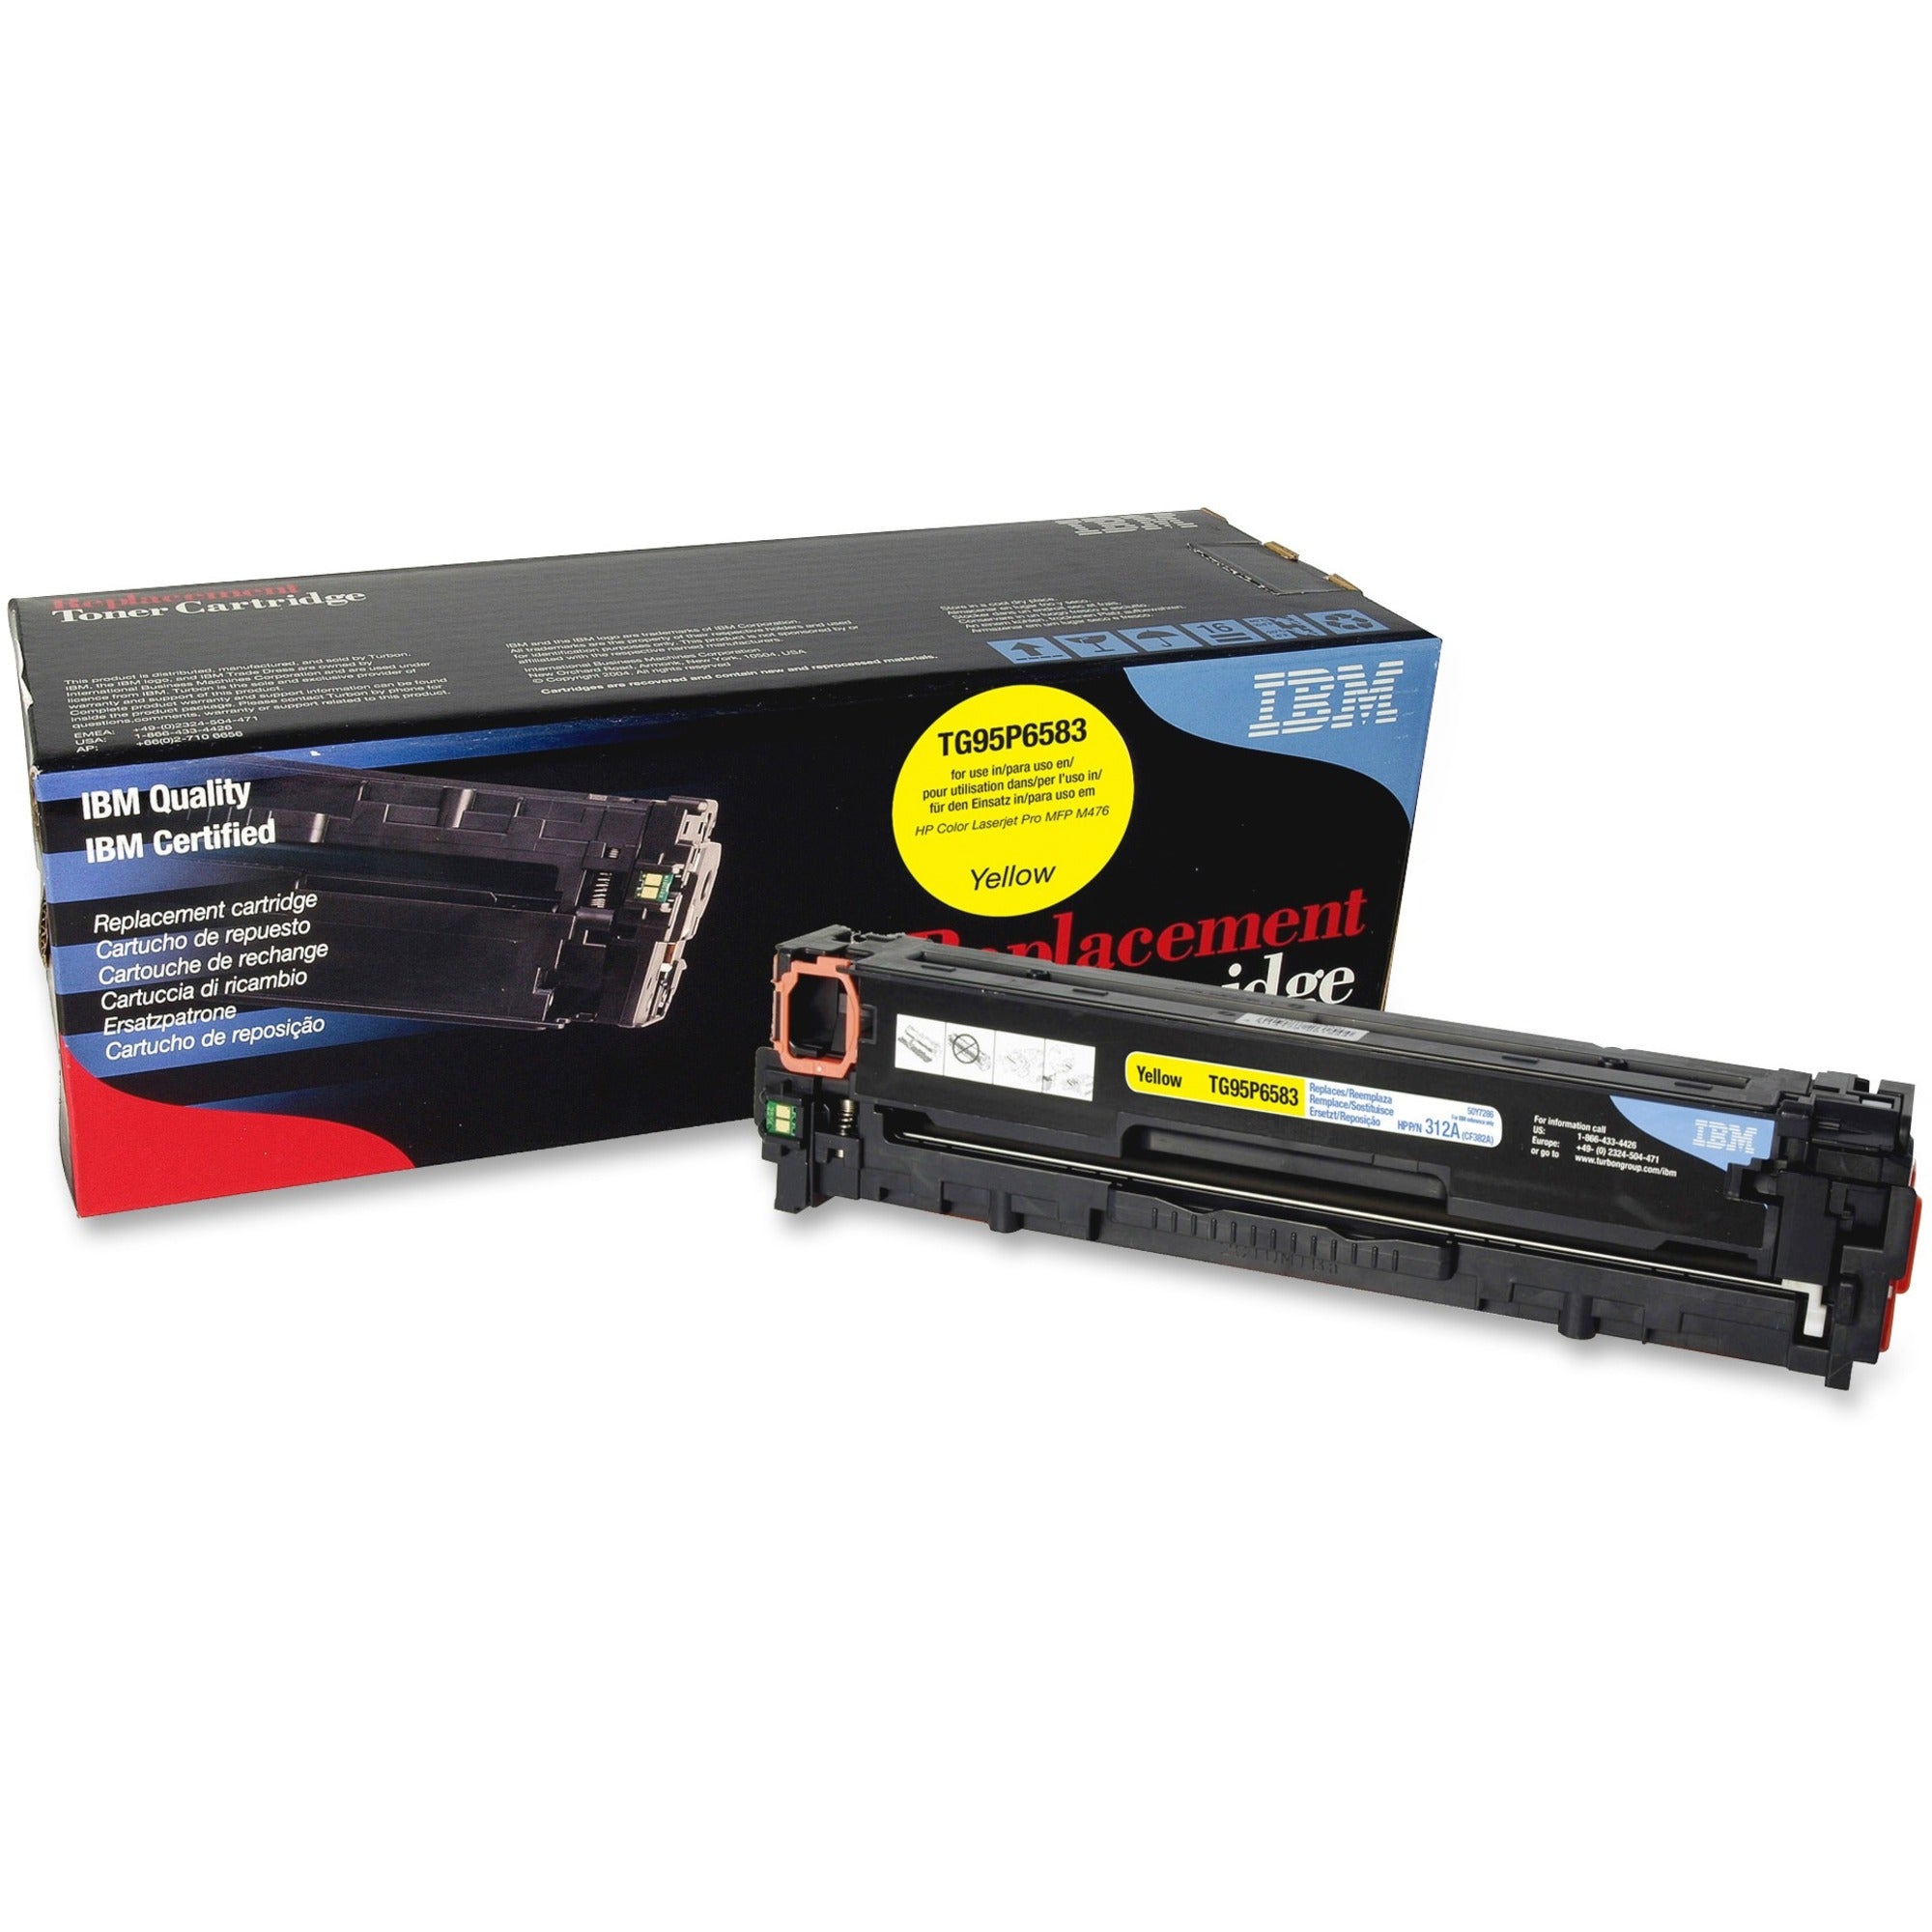 IBM Remanufactured Toner Cartridge - Alternative for HP 312A (CF382A) - Laser - 2700 Pages - Yellow - 1 Each - 